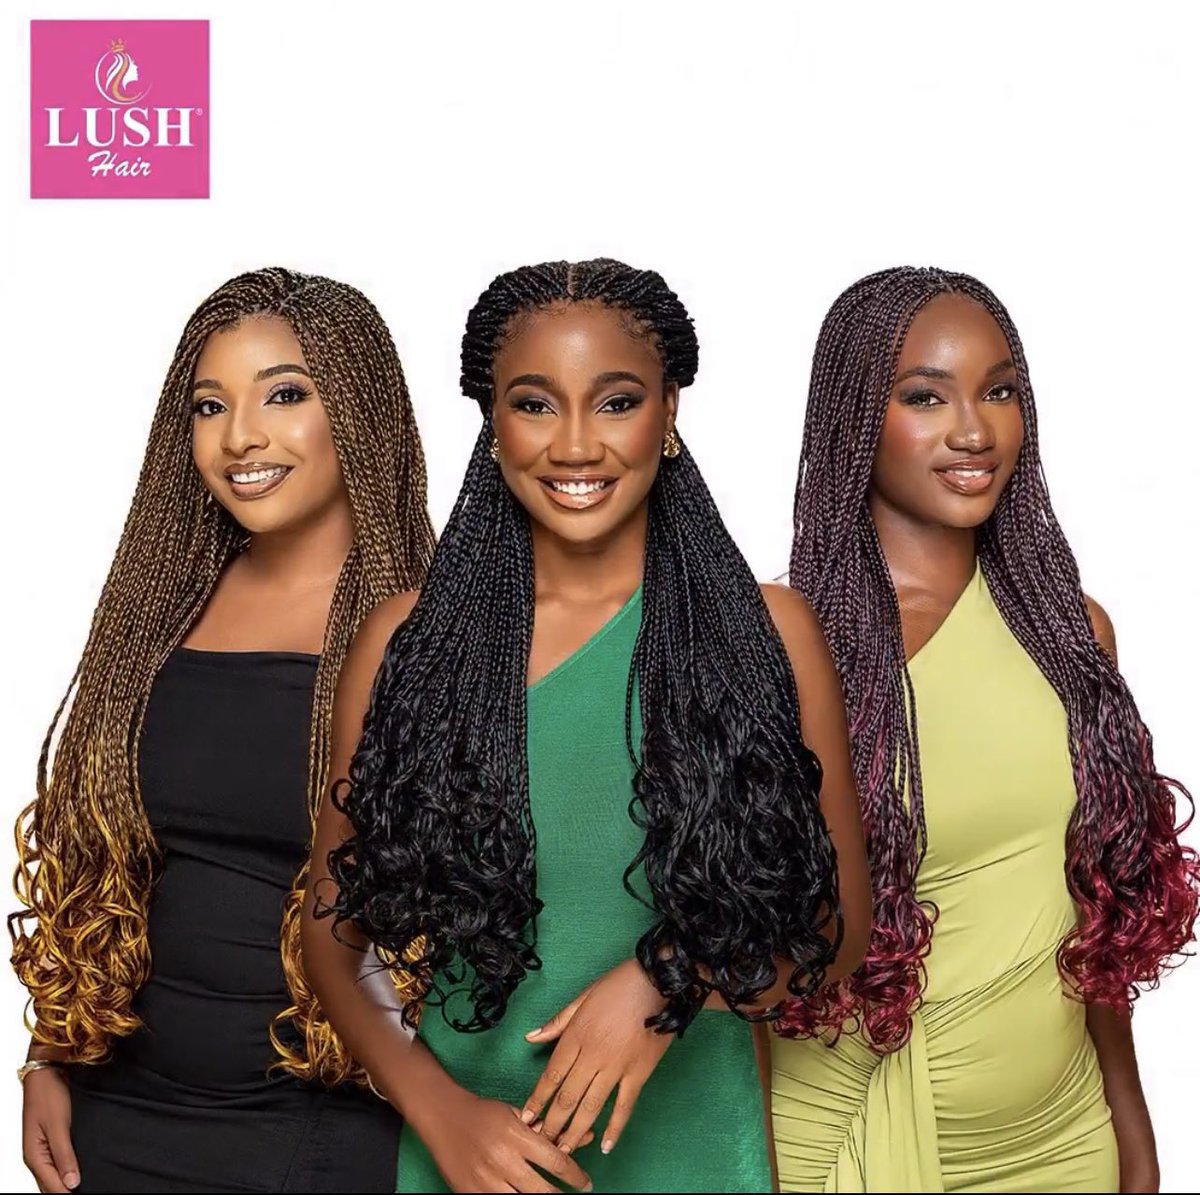 What's your excuse for not buying your fav hair extensions and products during this 25% discount sales from Lush?? This discount is ending in 11 days!! Shop lushhairafrica.com and use the code LUSHCARES to activate 25% discount on each product bought.